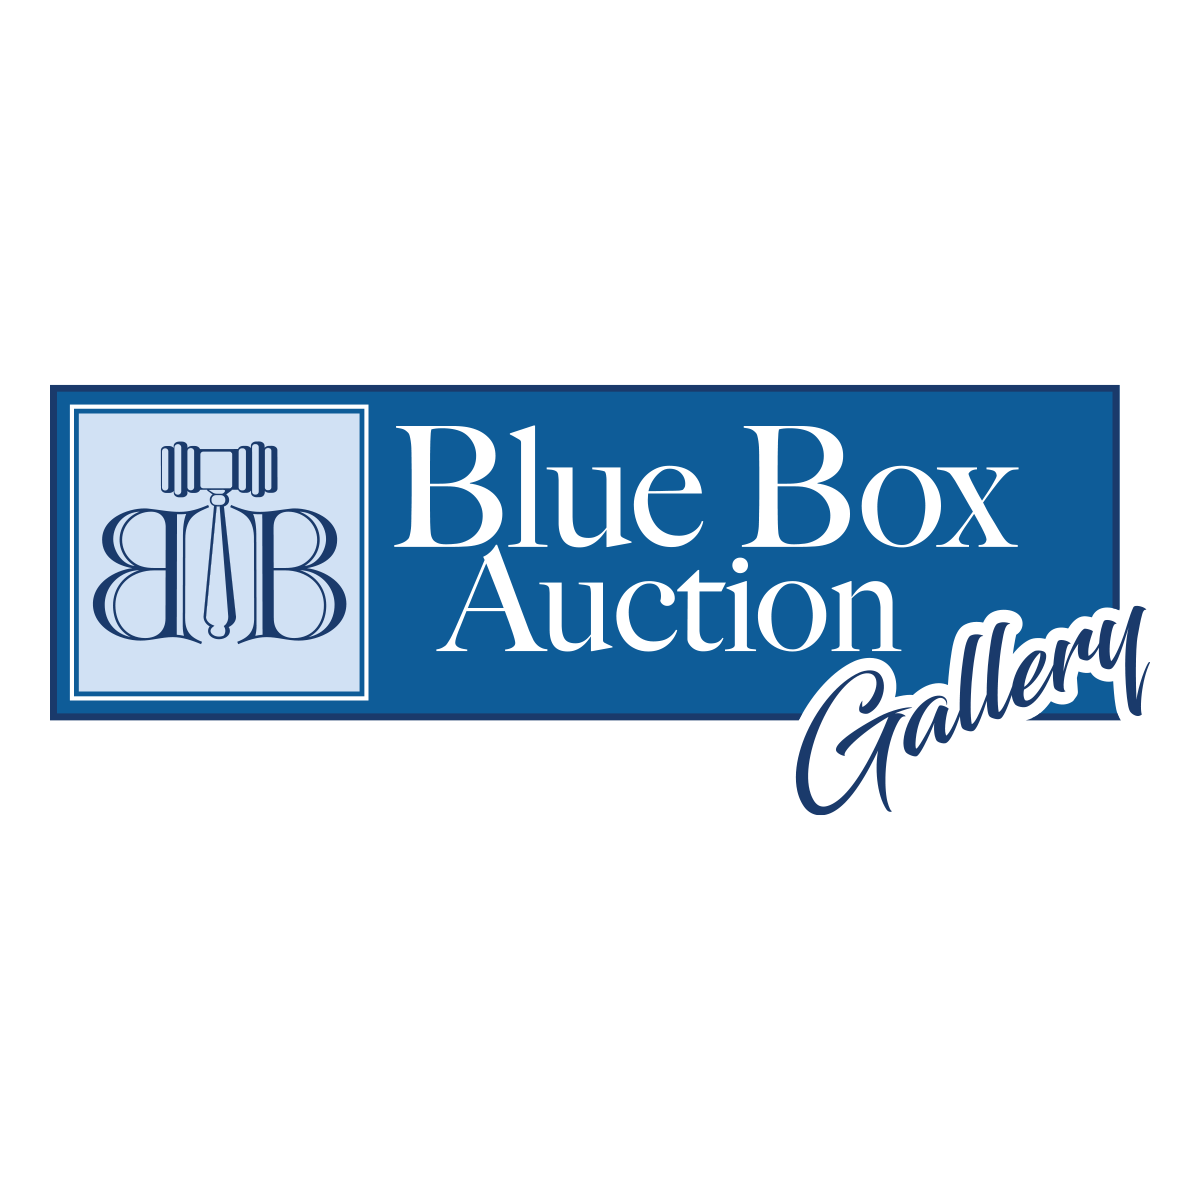 Blue Box Auction Gallery - Buy and Sell with Confidence